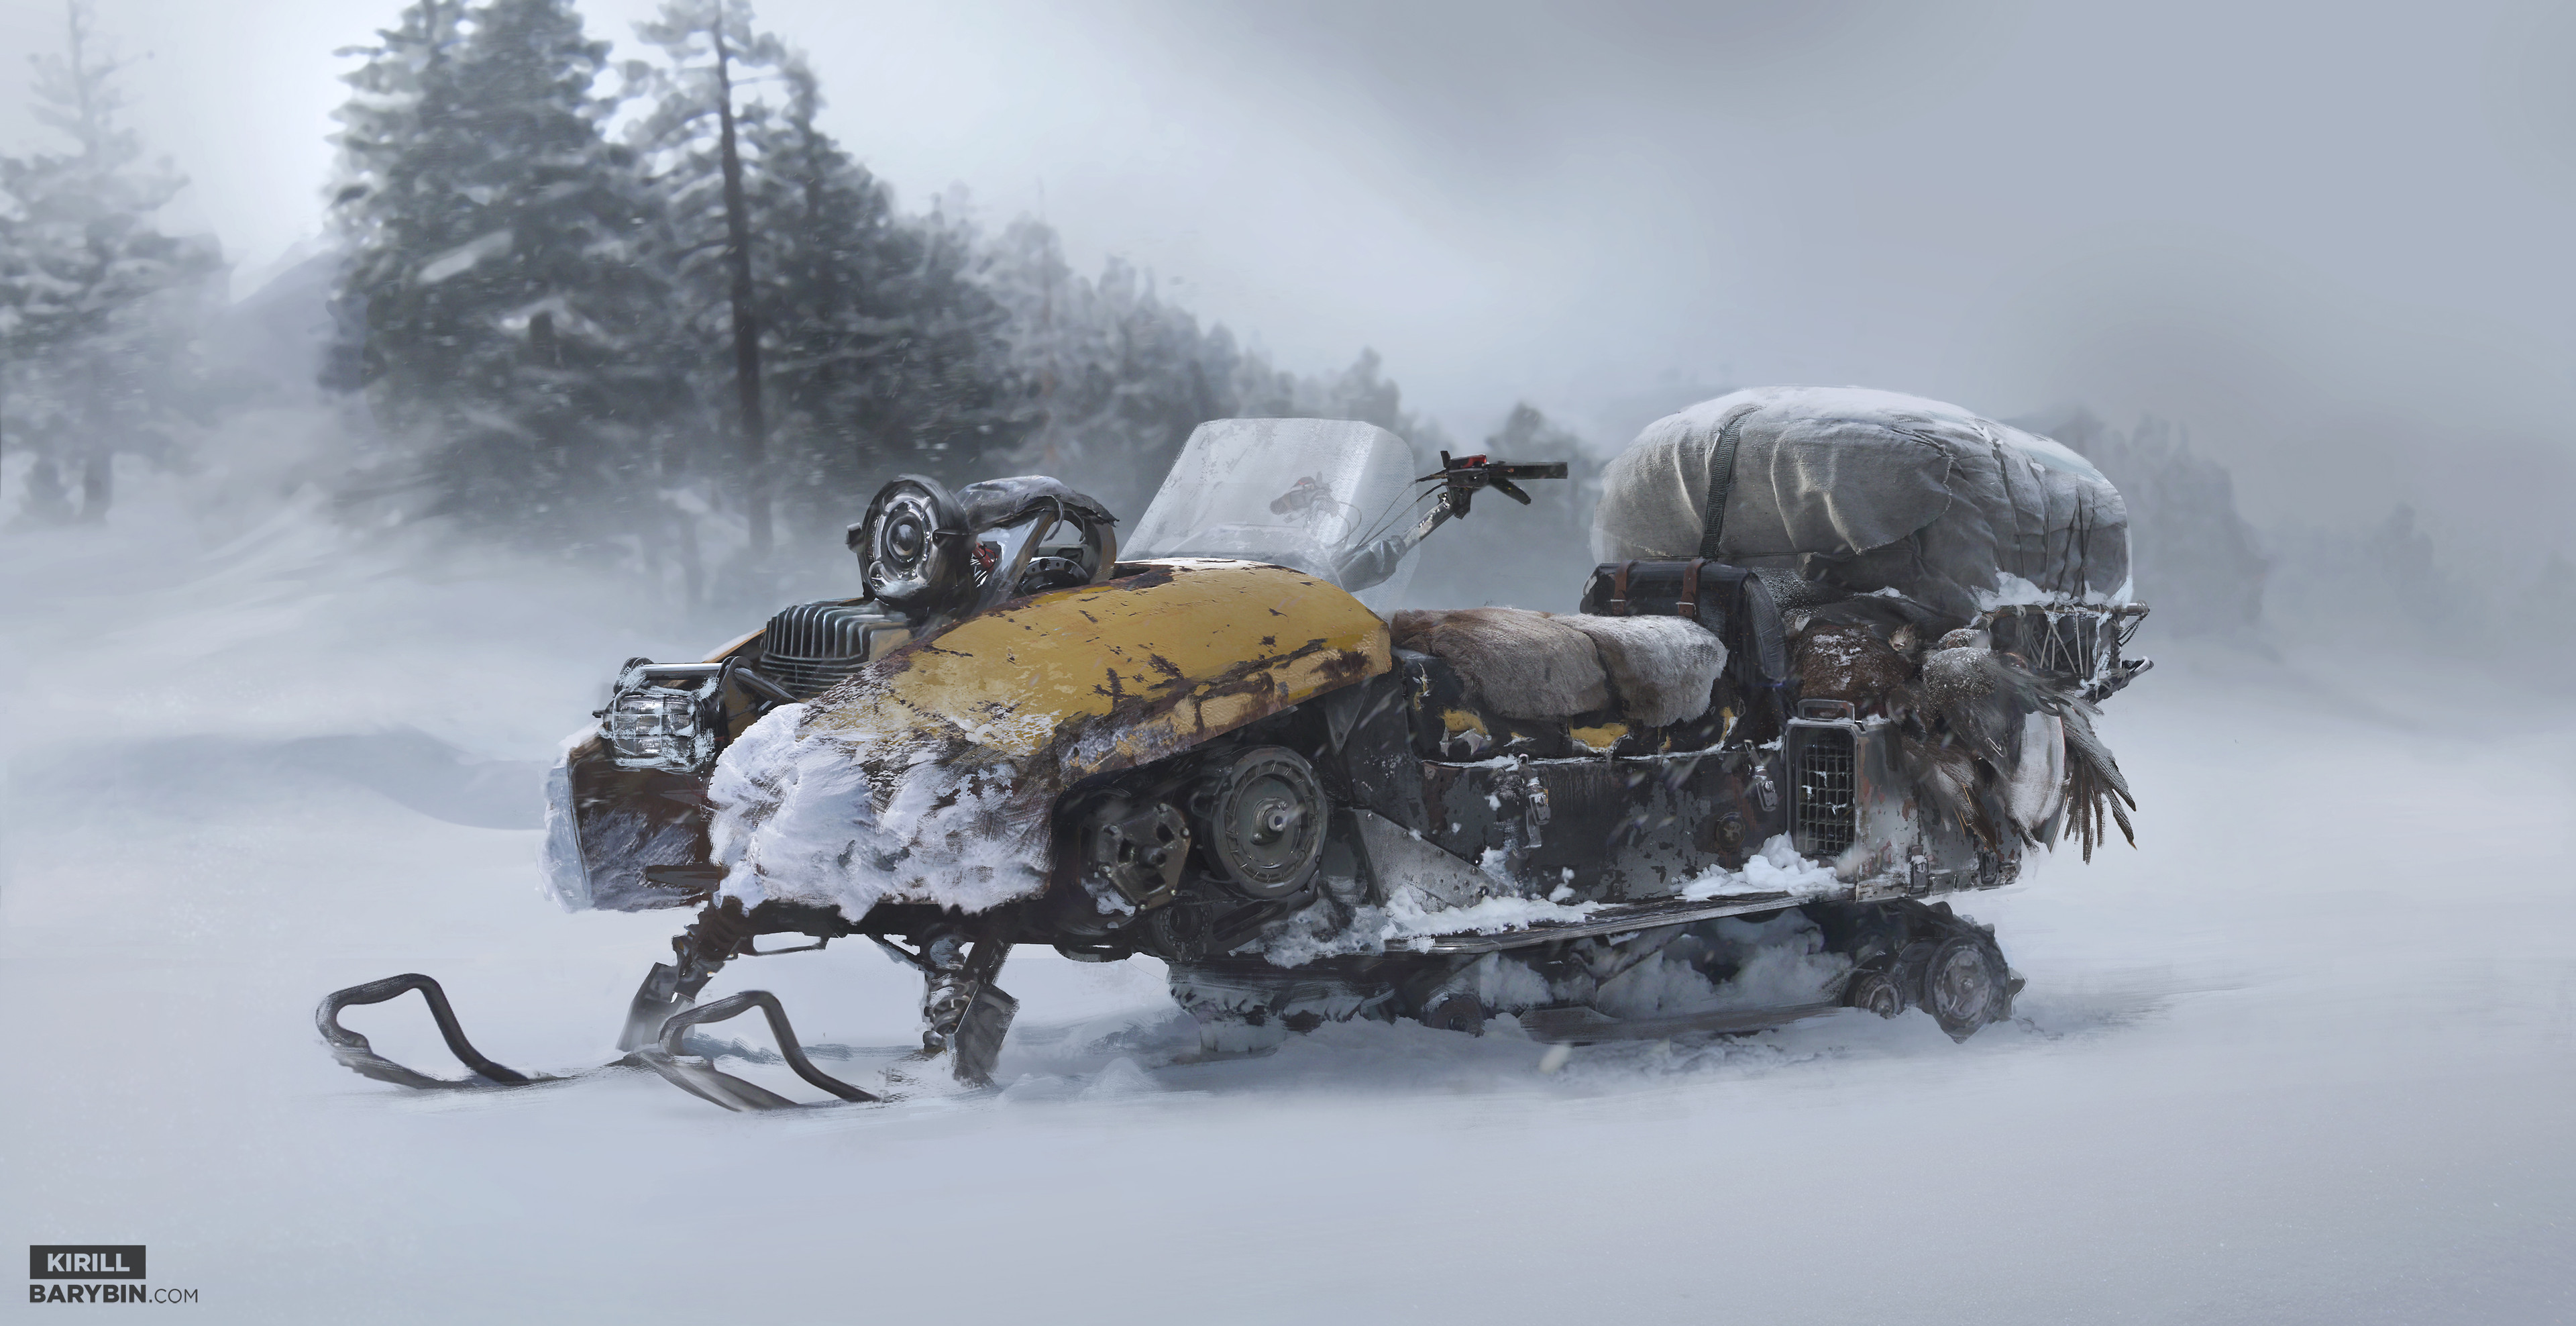 Semyon doesn´t have access to modern technology. He tries to come by with what he can accumulate and buy on the market. 
The experienced trapper modified his old snowmobile and his simple axe to gear up for the incoming threat.